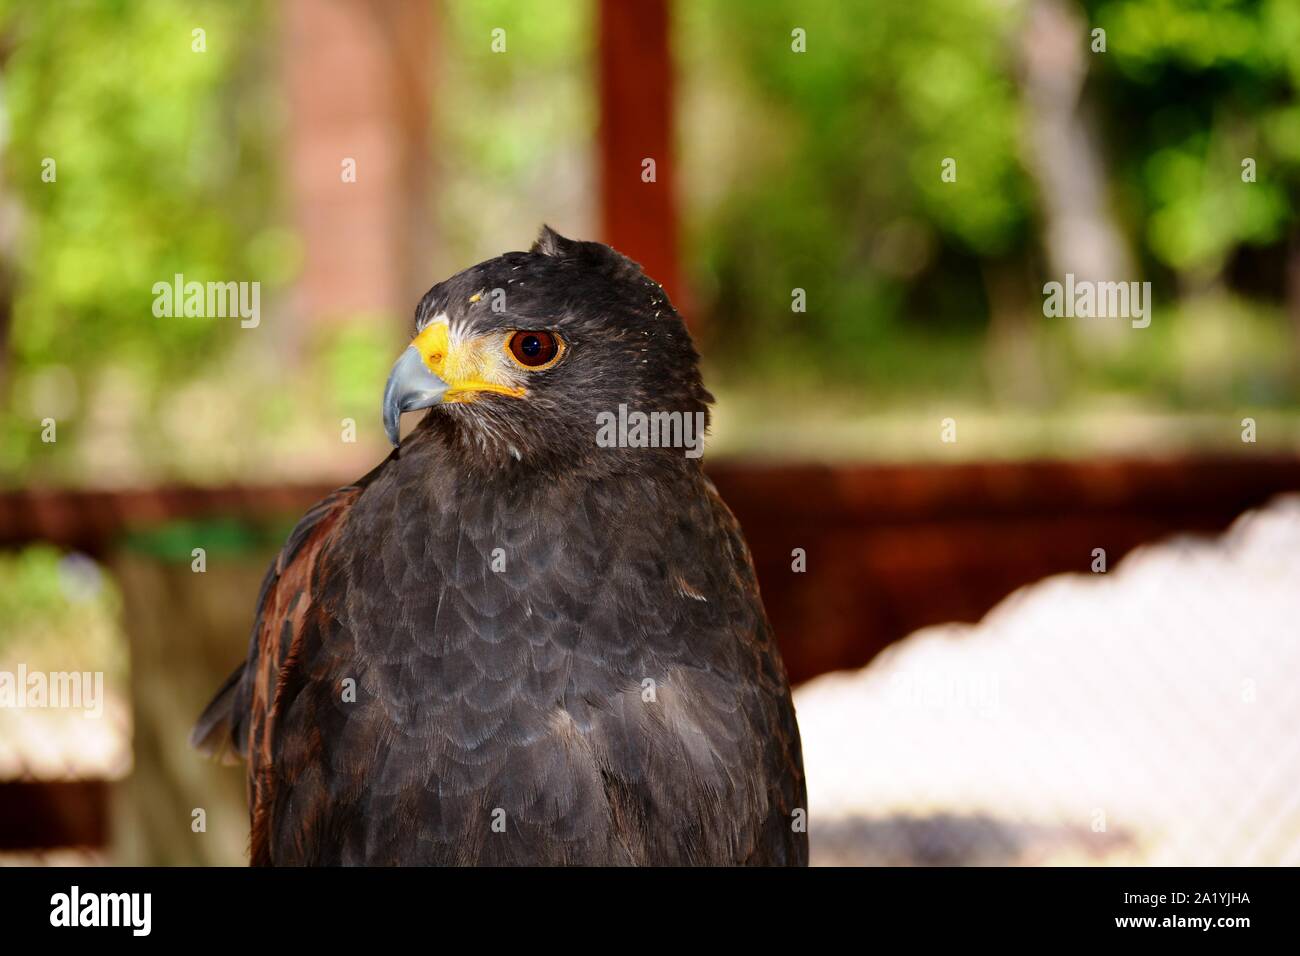 the head of an eagle with the yellow beak Stock Photo